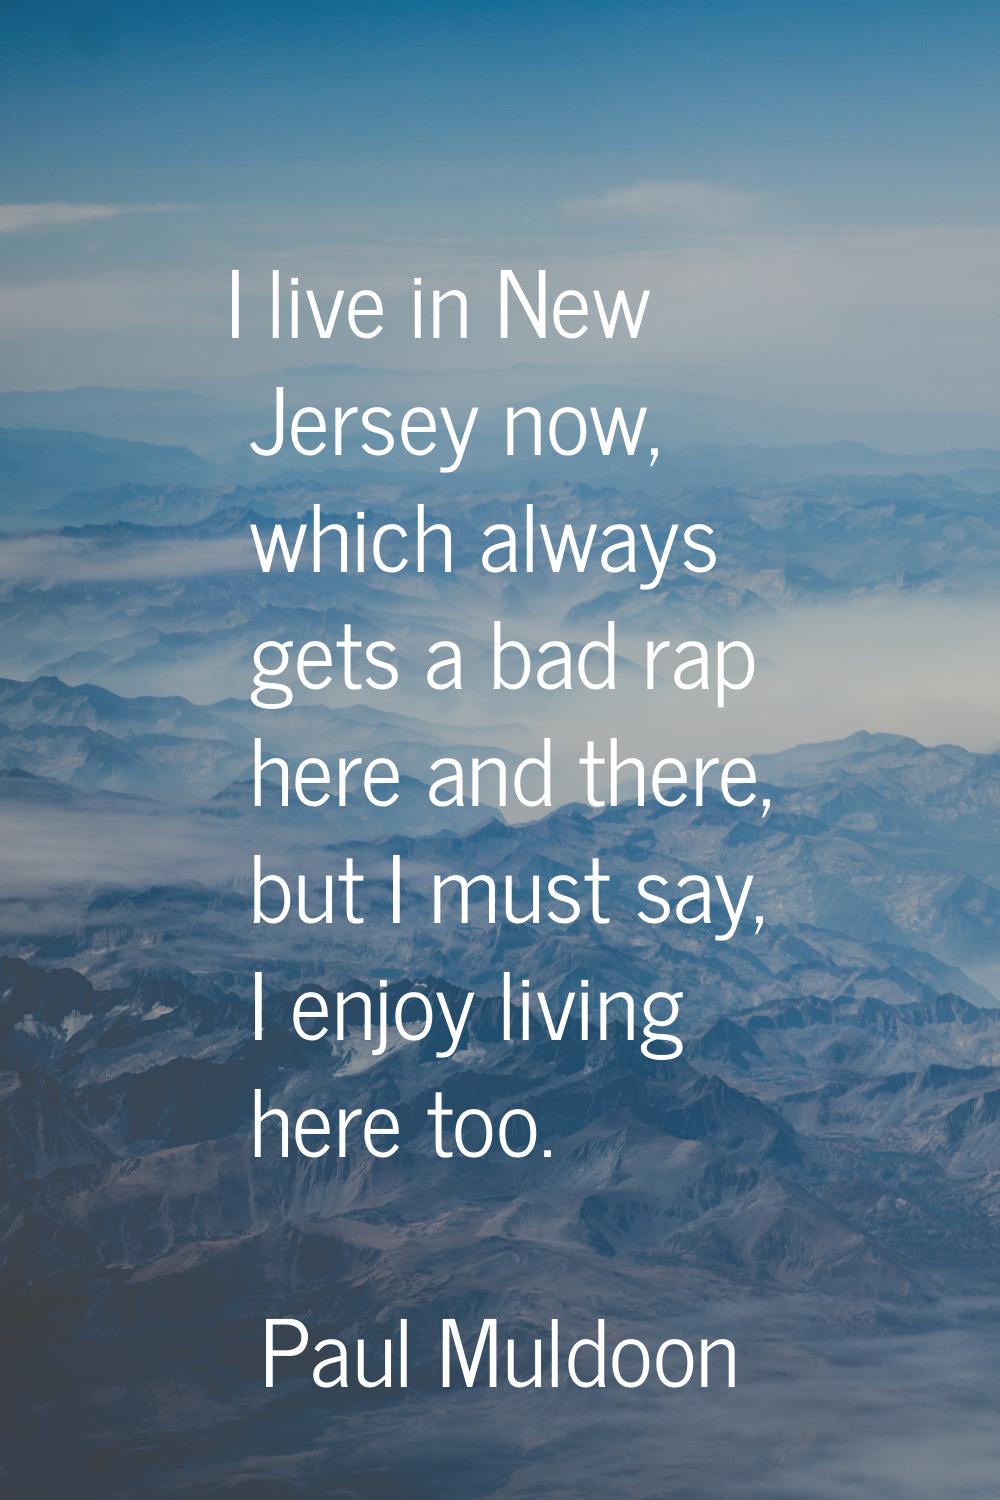 I live in New Jersey now, which always gets a bad rap here and there, but I must say, I enjoy livin